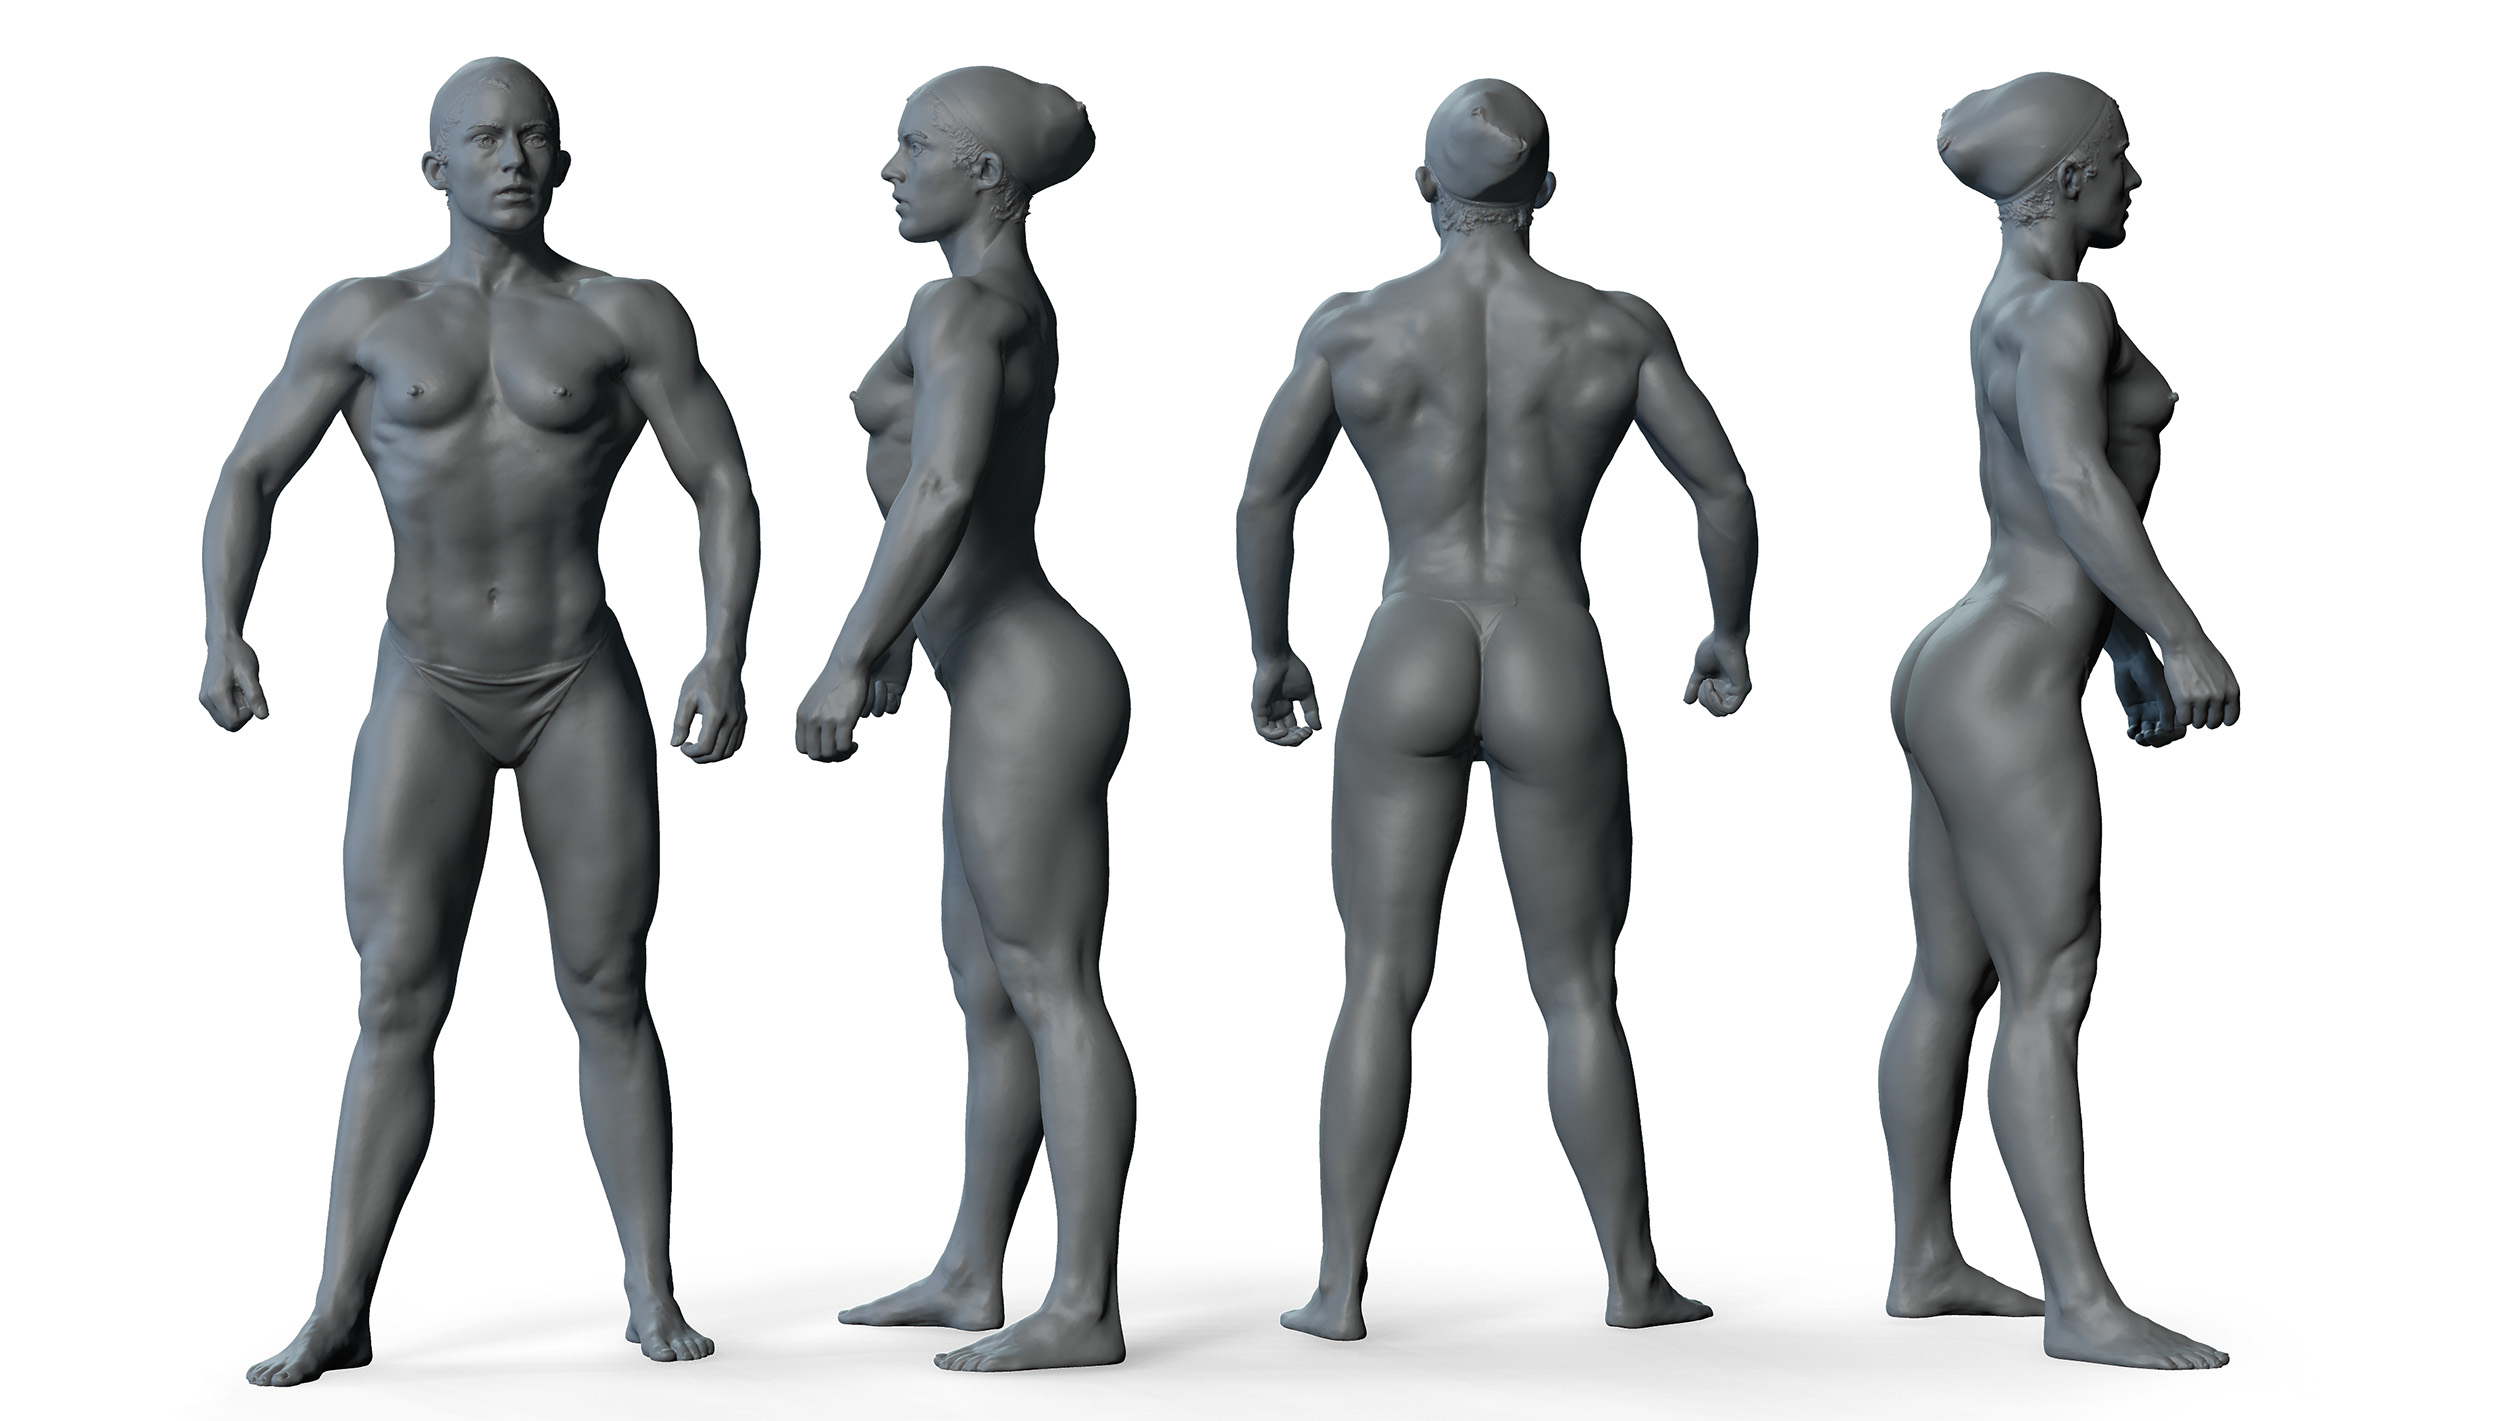 X 上的 'POSETASTIC!' Posing App for Character/Figure art.：「Finally,Spring  Sun's in'd air! #design #drawing #comics #3d #conceptart #digitalart  #animation #anime #creative #pose #sketch #vfx #photography #model # character #reference #anatomy #dance ...